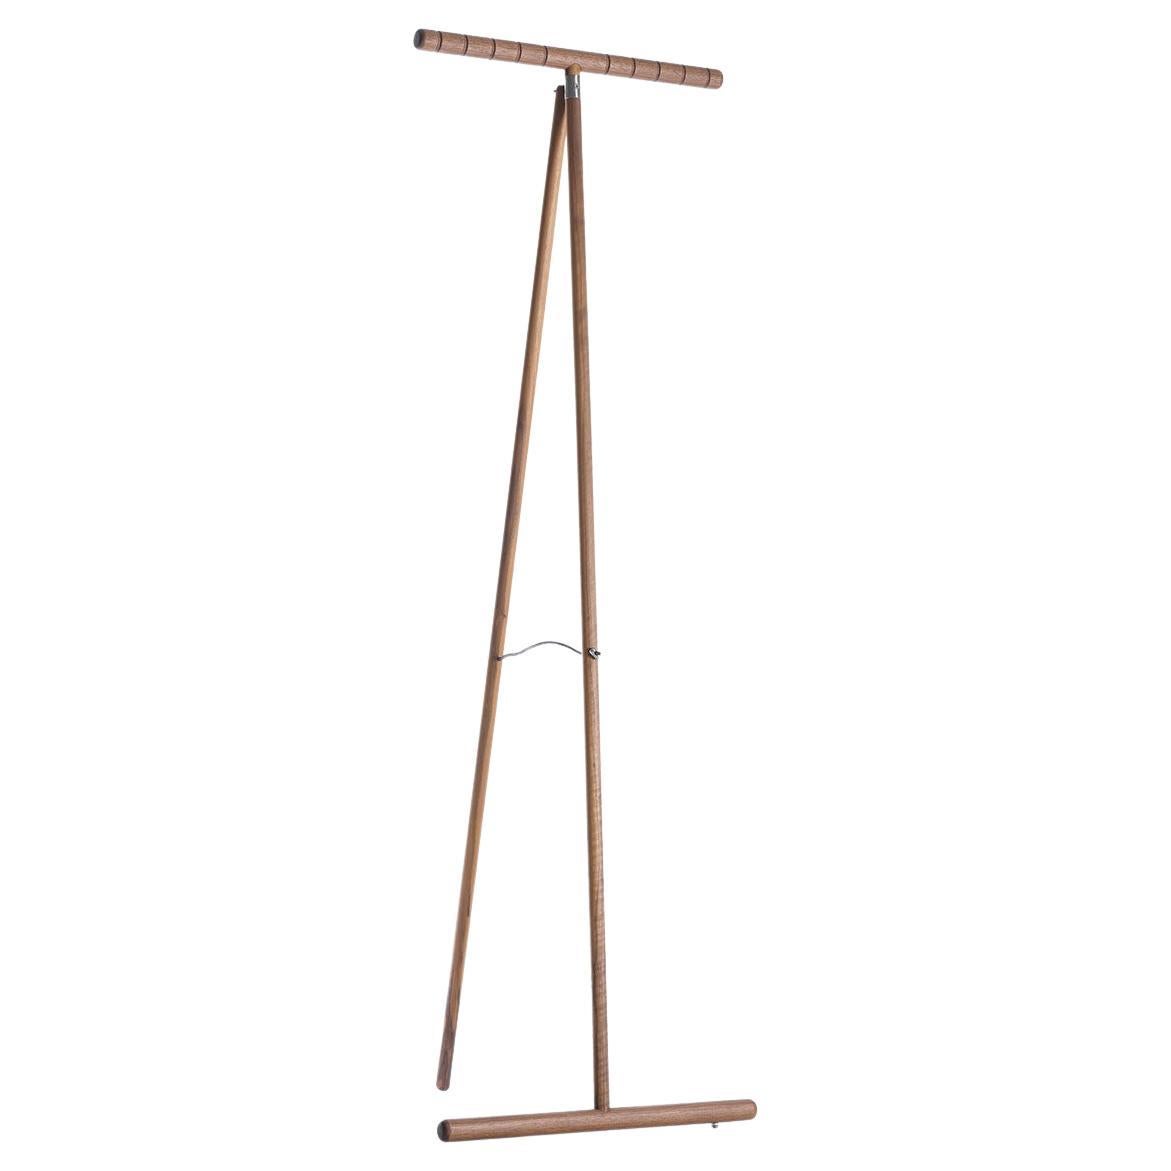 Spalla Solid Wood Hanger, Walnut in Hand-Made Natural Finish, Contemporary For Sale